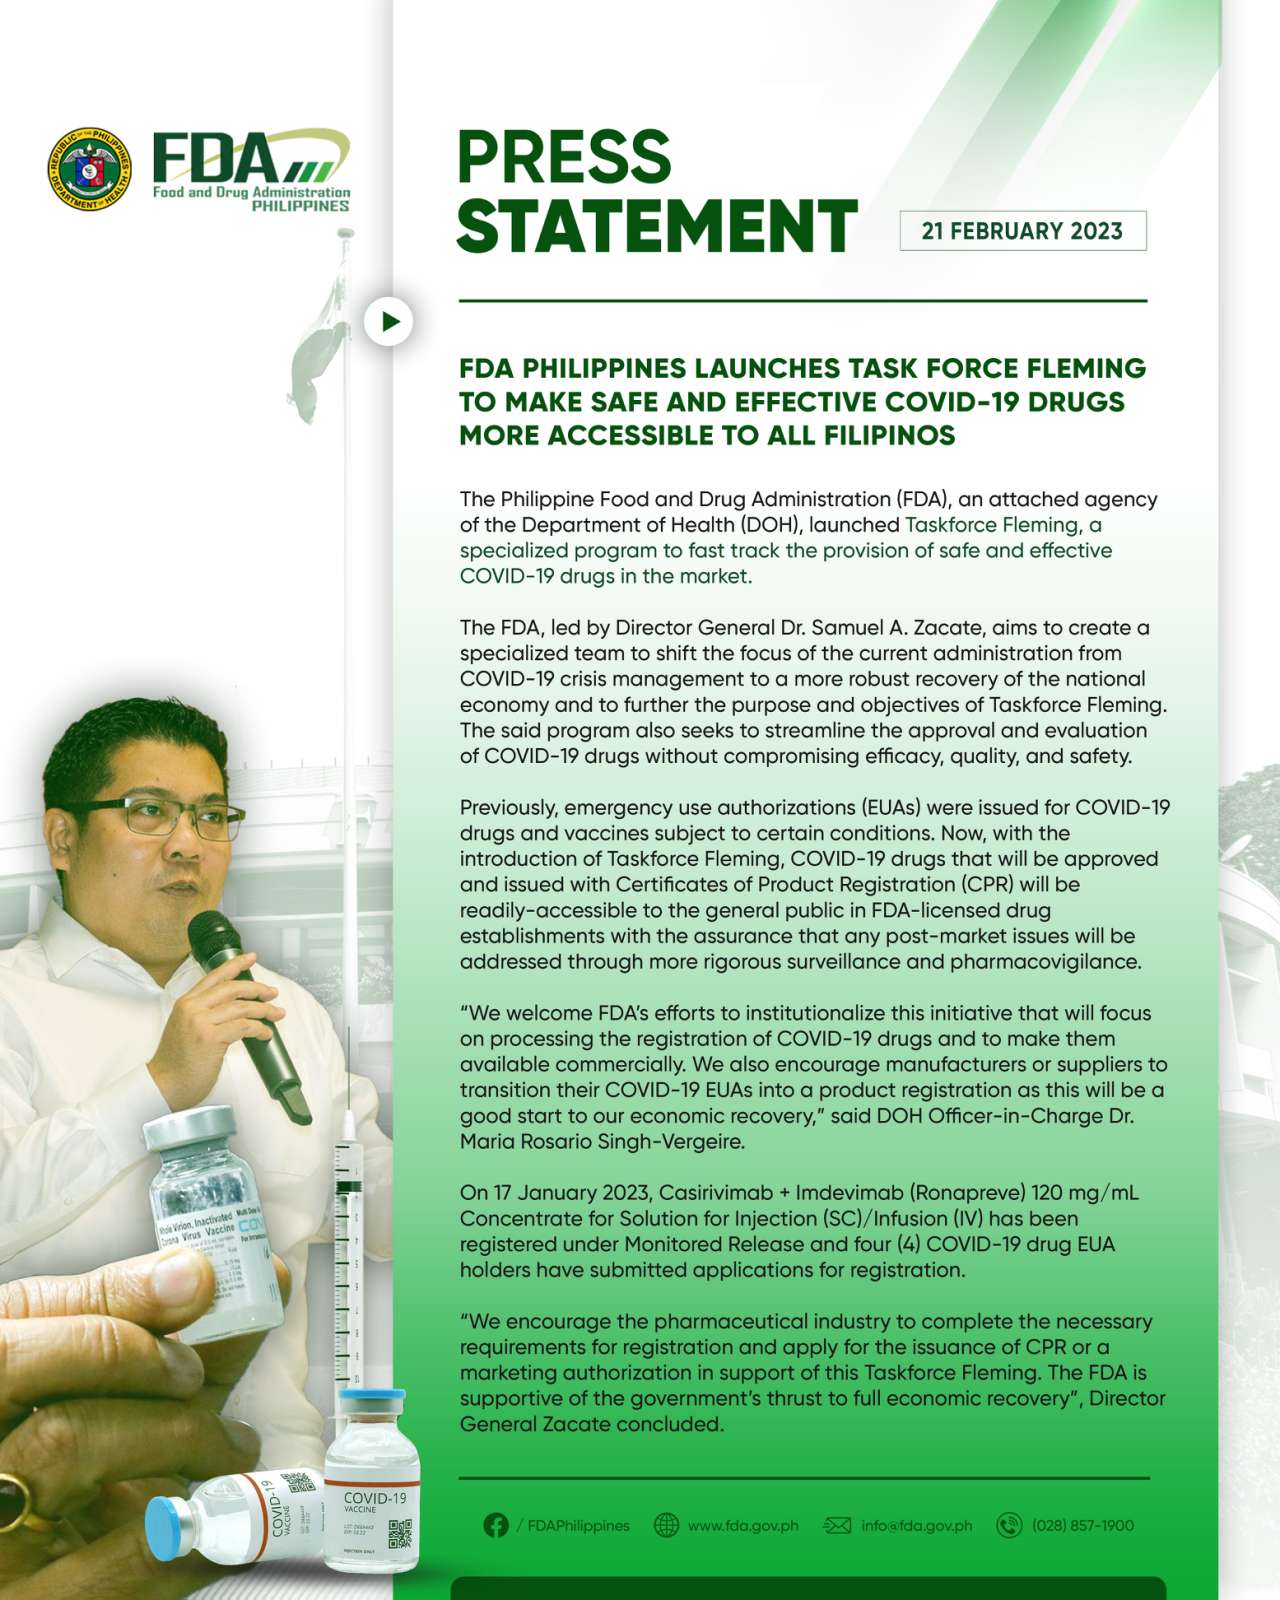 FDA Press Statement || 21 February 2023 FDA Philippines Launches Task Force Fleming to Make Safe and Effective Covid-19 Drugs More Accessible to All Filipinos.